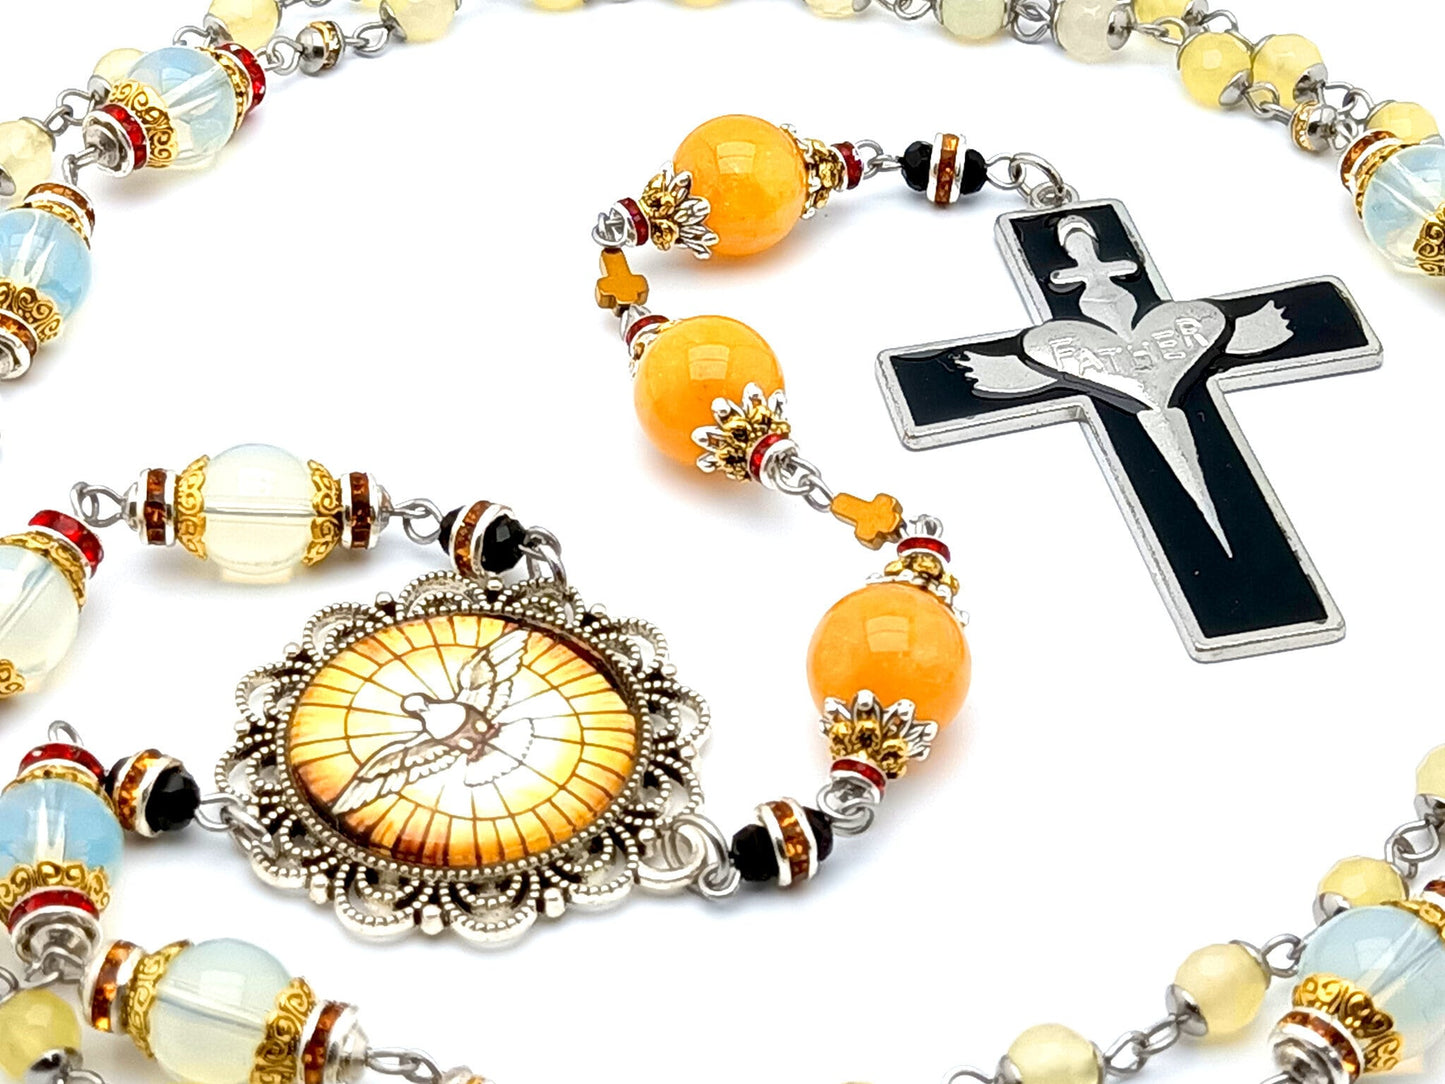 Holy Spirit uniuq rosary beads prayer chaplet with agate opal and jade gemstone beads and Holy Spirit enamel crucifix.